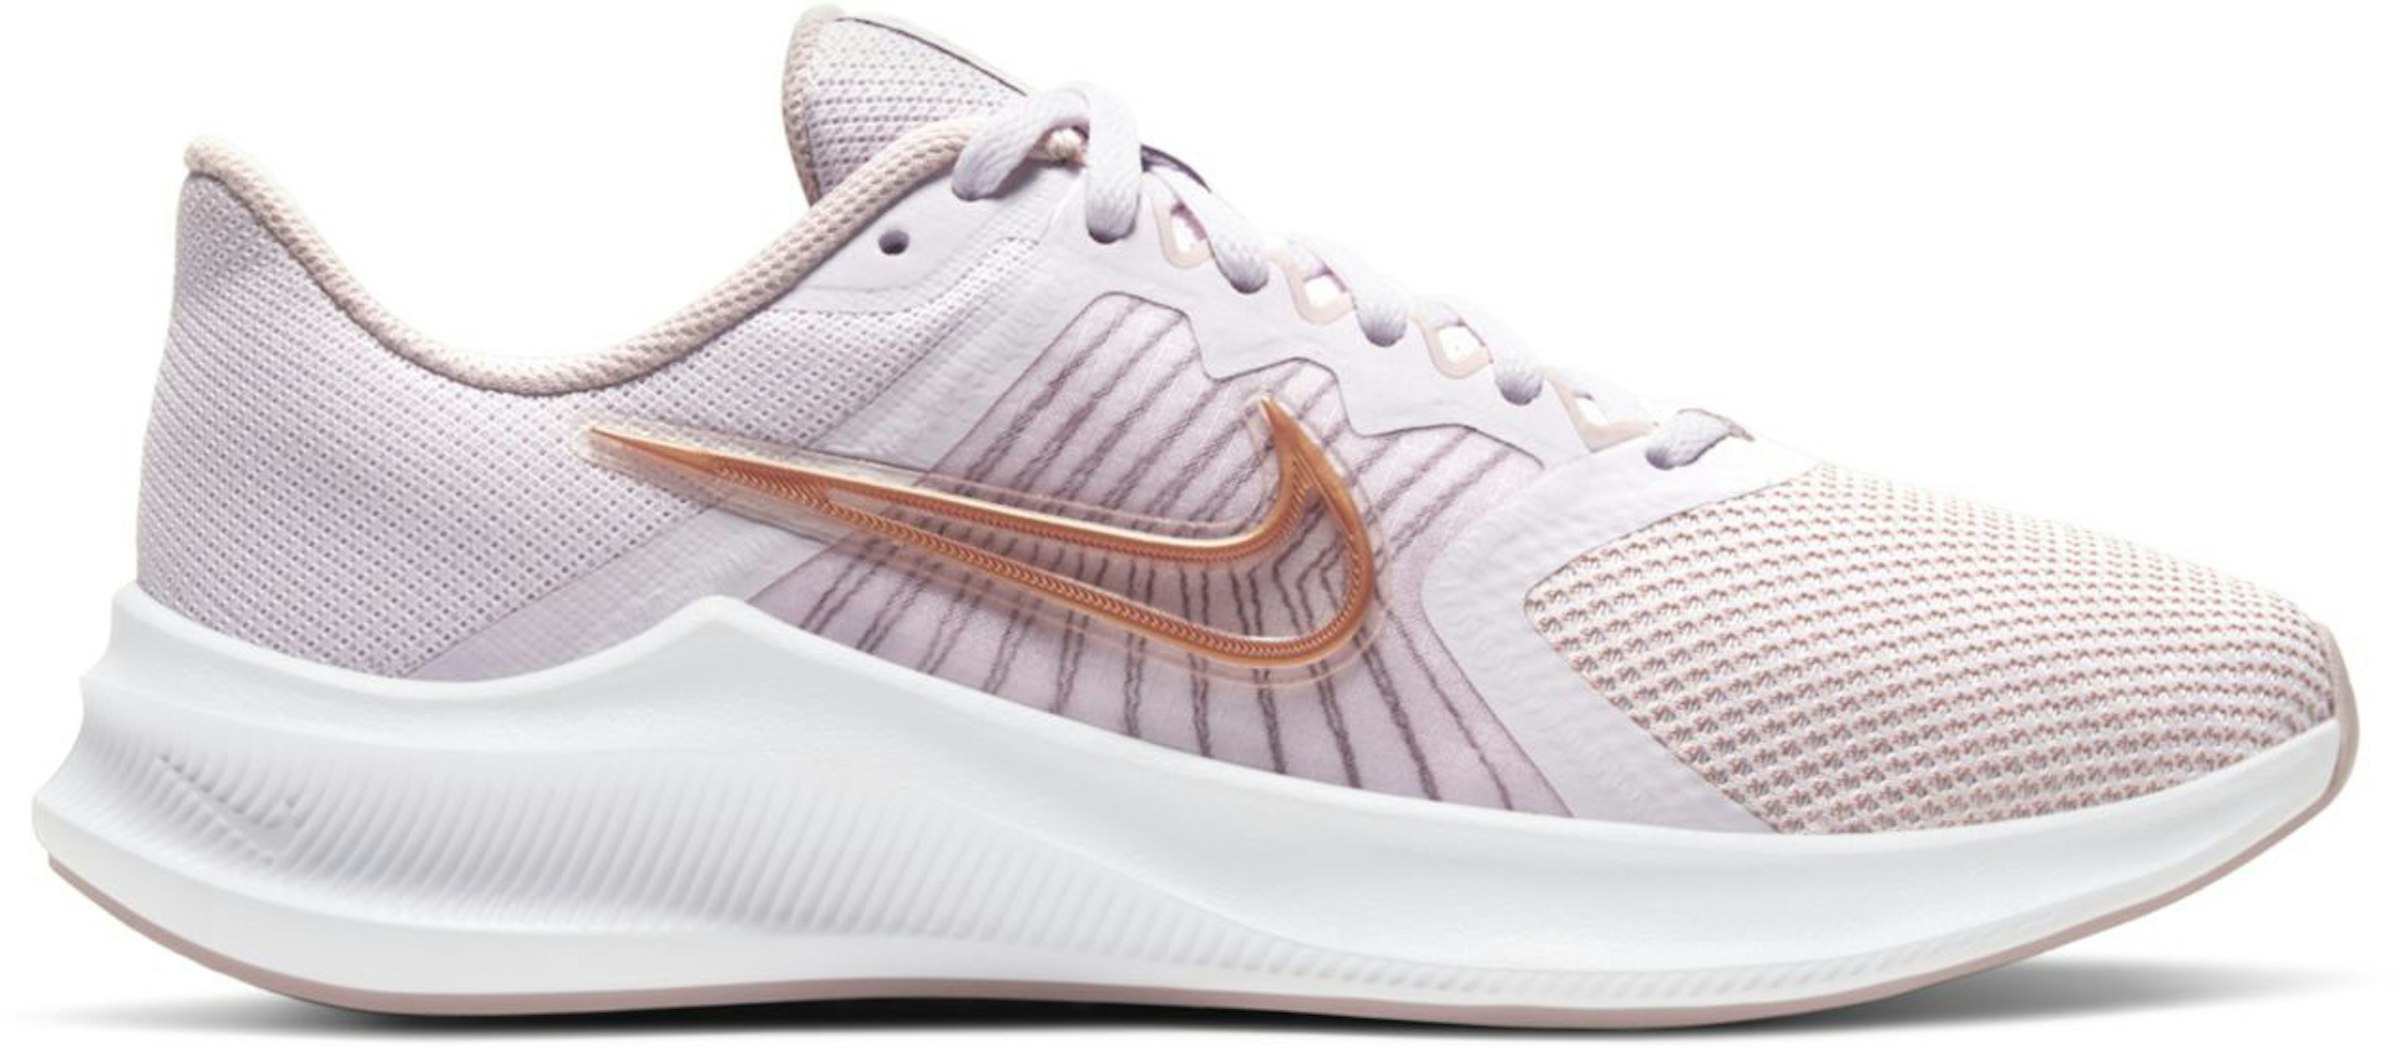 Gewoon actrice begroting Nike Downshifter 11 Light Violet Champagne (Women's) - CW3413-500 - US